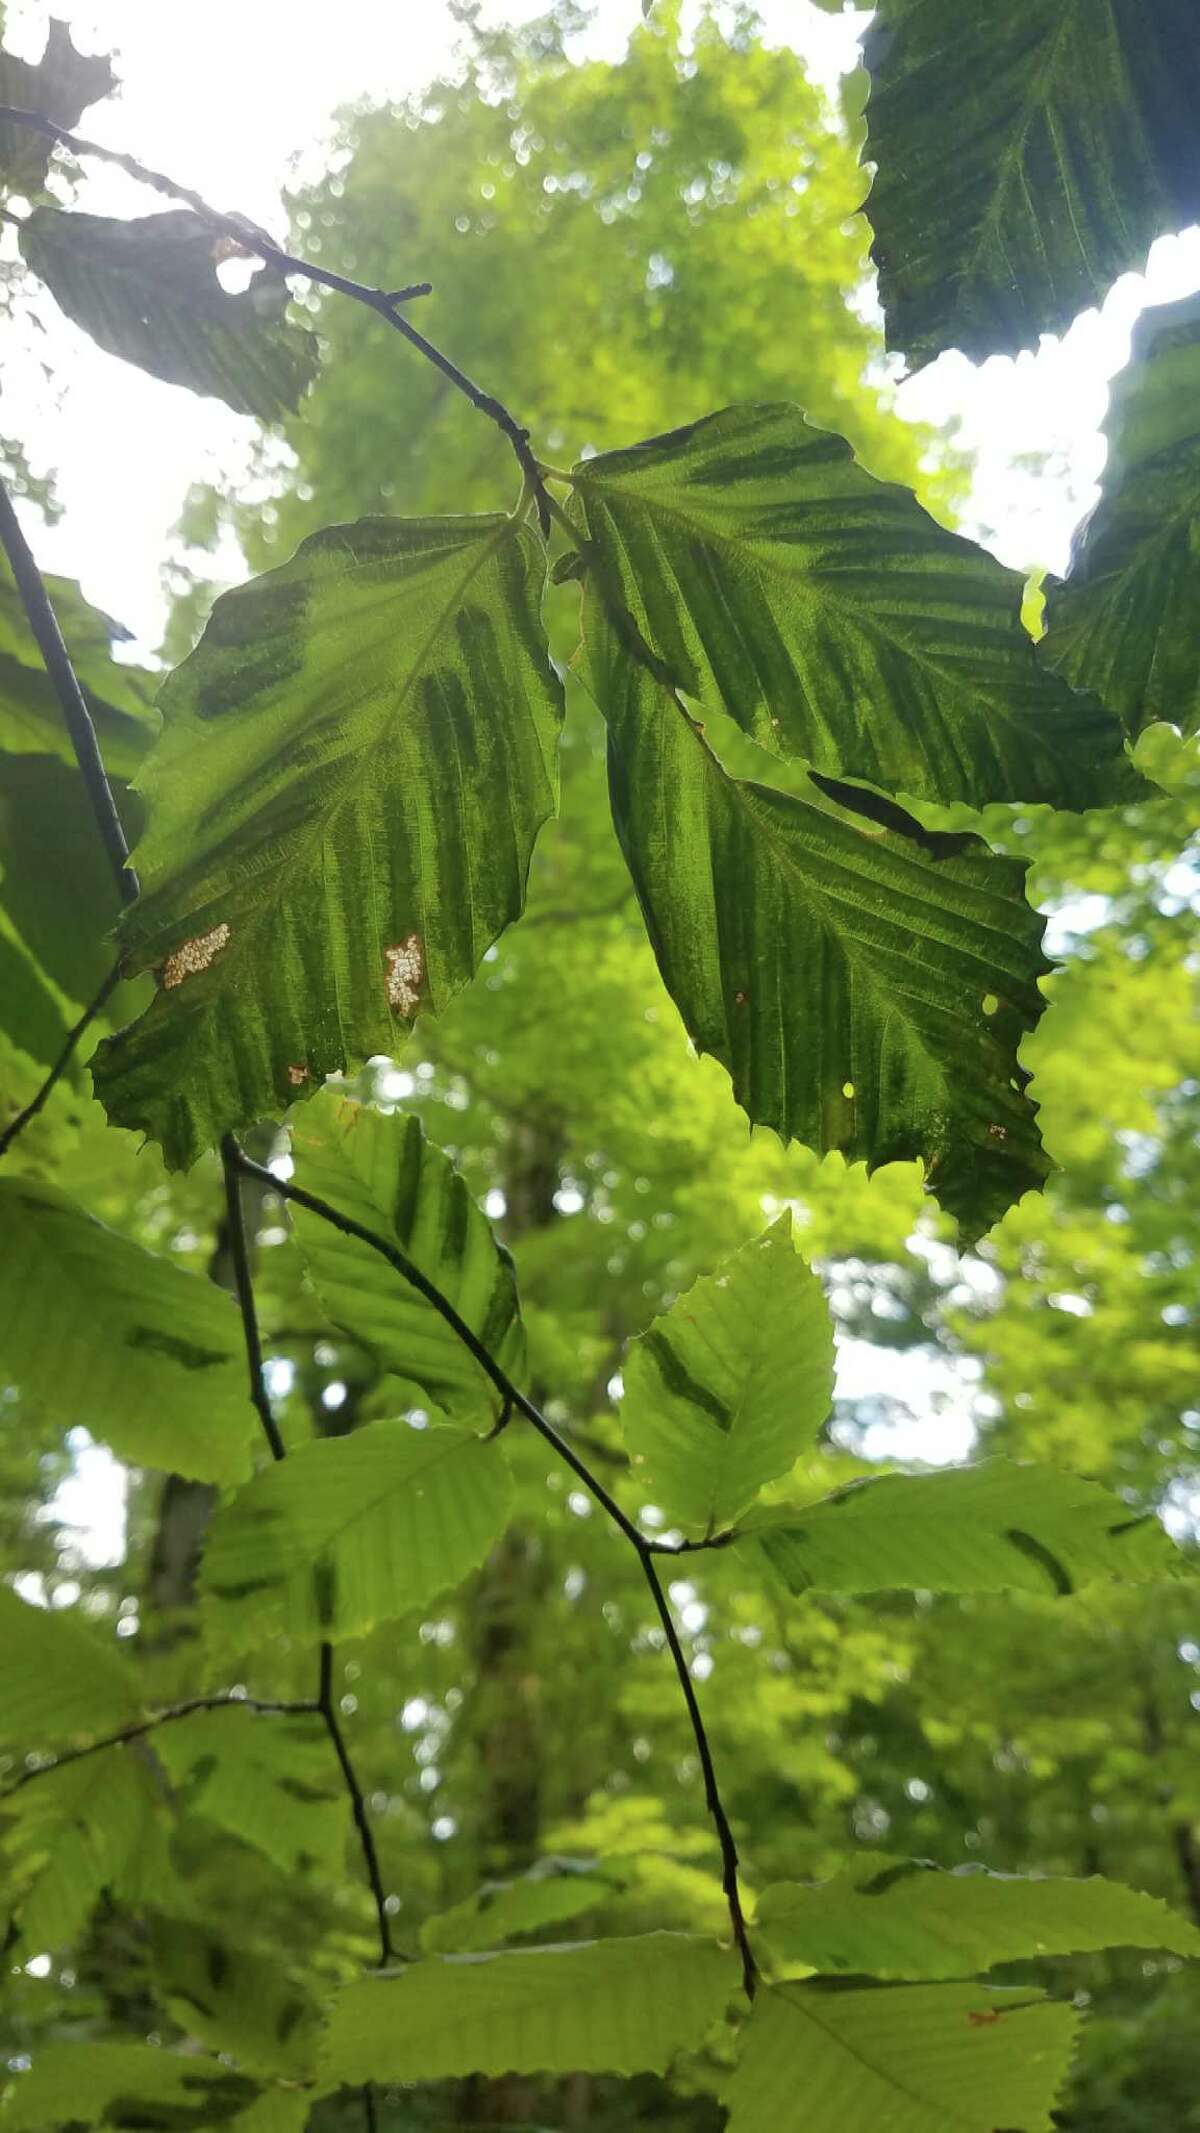 State Department of Environmental Conservation announced that Beech Leaf Disease (BLD), which affects all species of beech trees, was identified in 35 counties in New York State to date on July 15, 2022